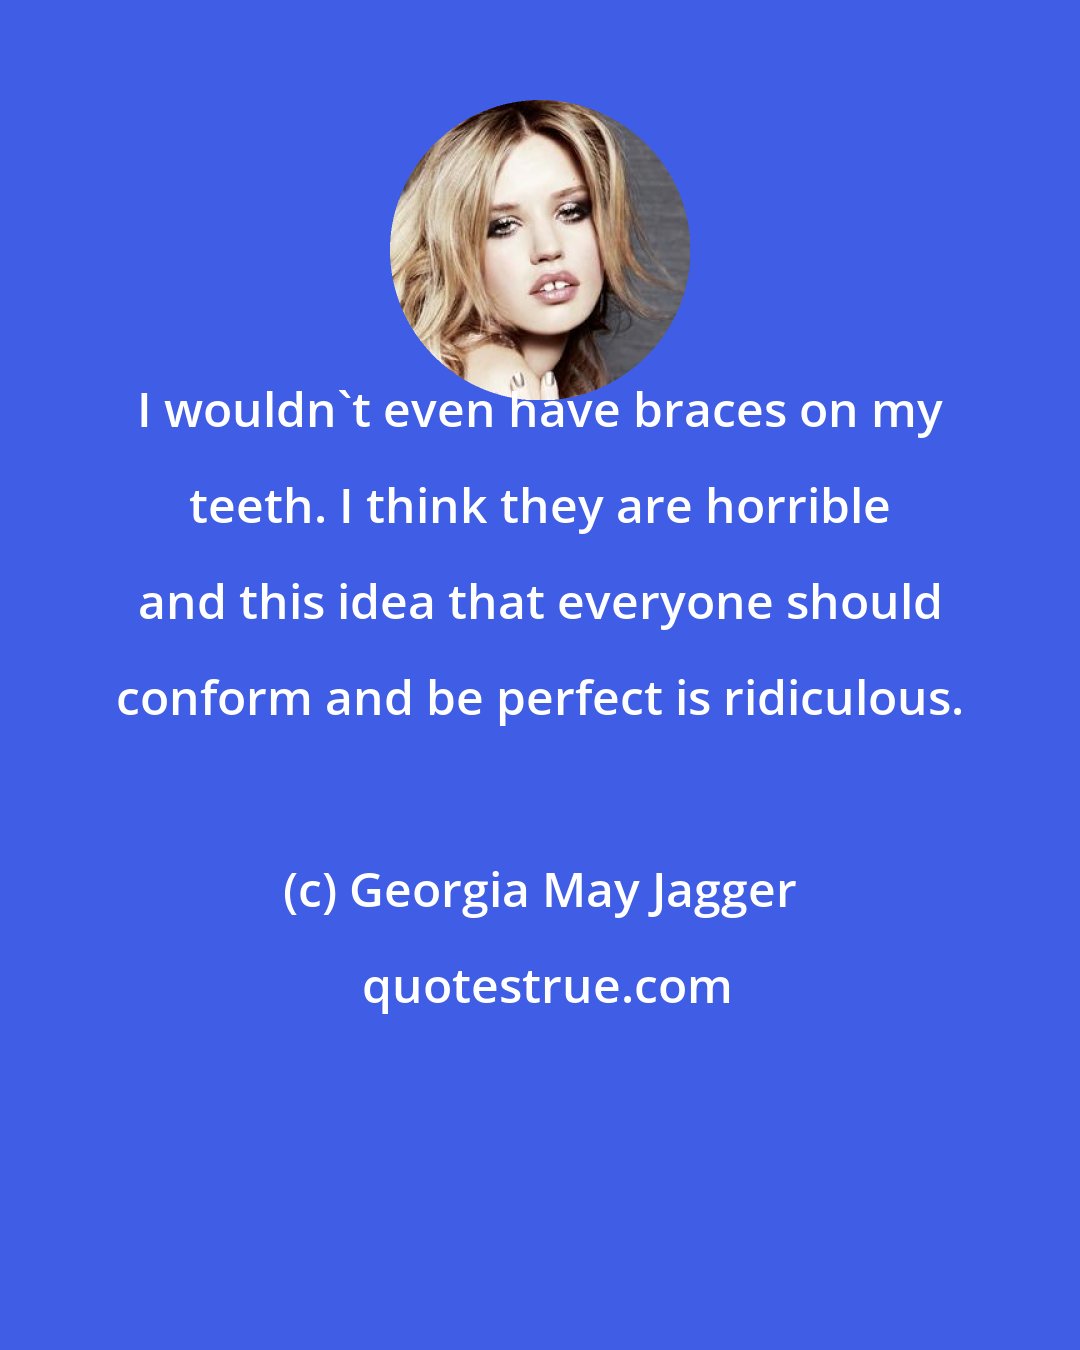 Georgia May Jagger: I wouldn't even have braces on my teeth. I think they are horrible and this idea that everyone should conform and be perfect is ridiculous.